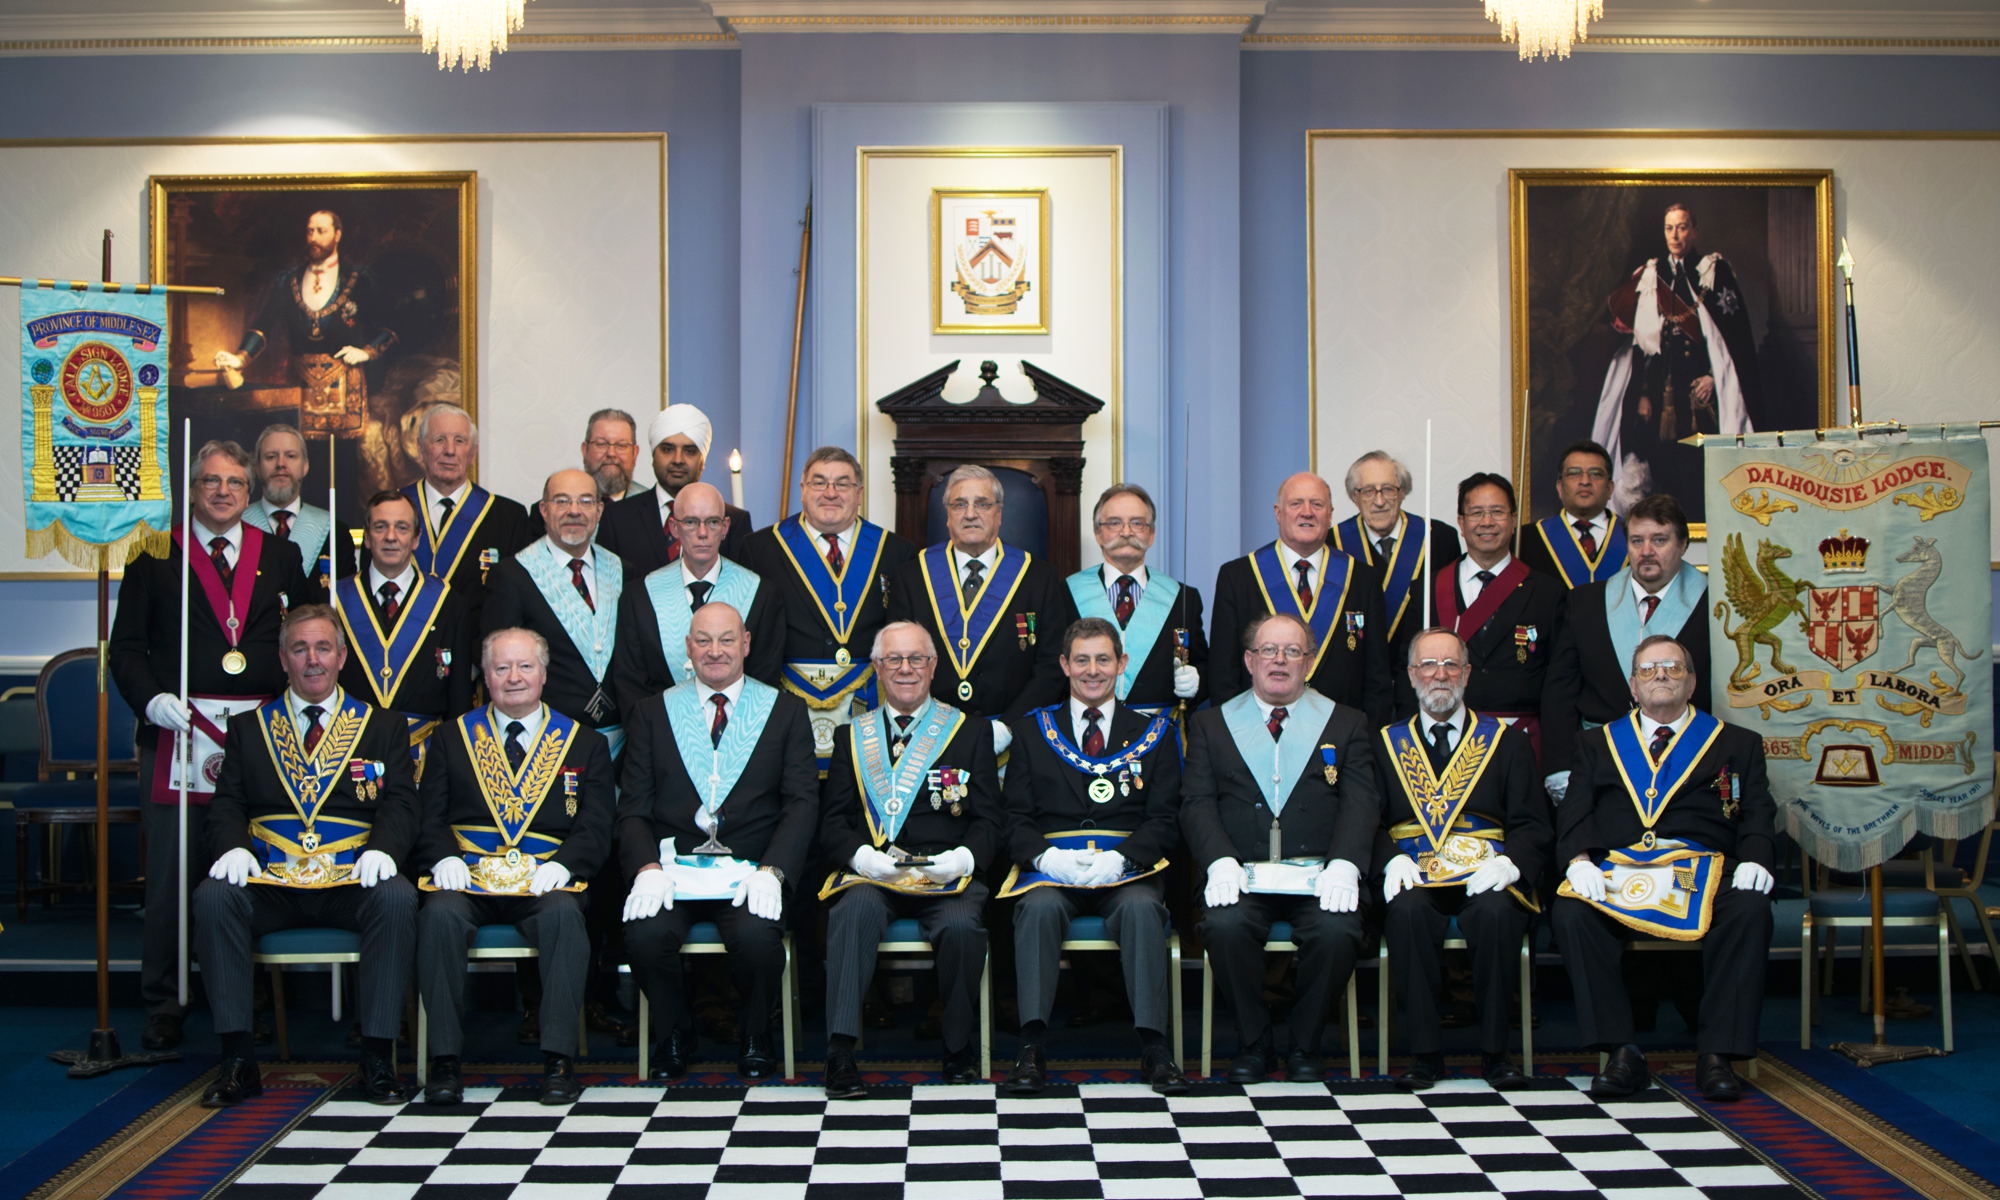 4th March 2017 The Joining of Dalhousie 865 & Call Sign 9501 Lodges